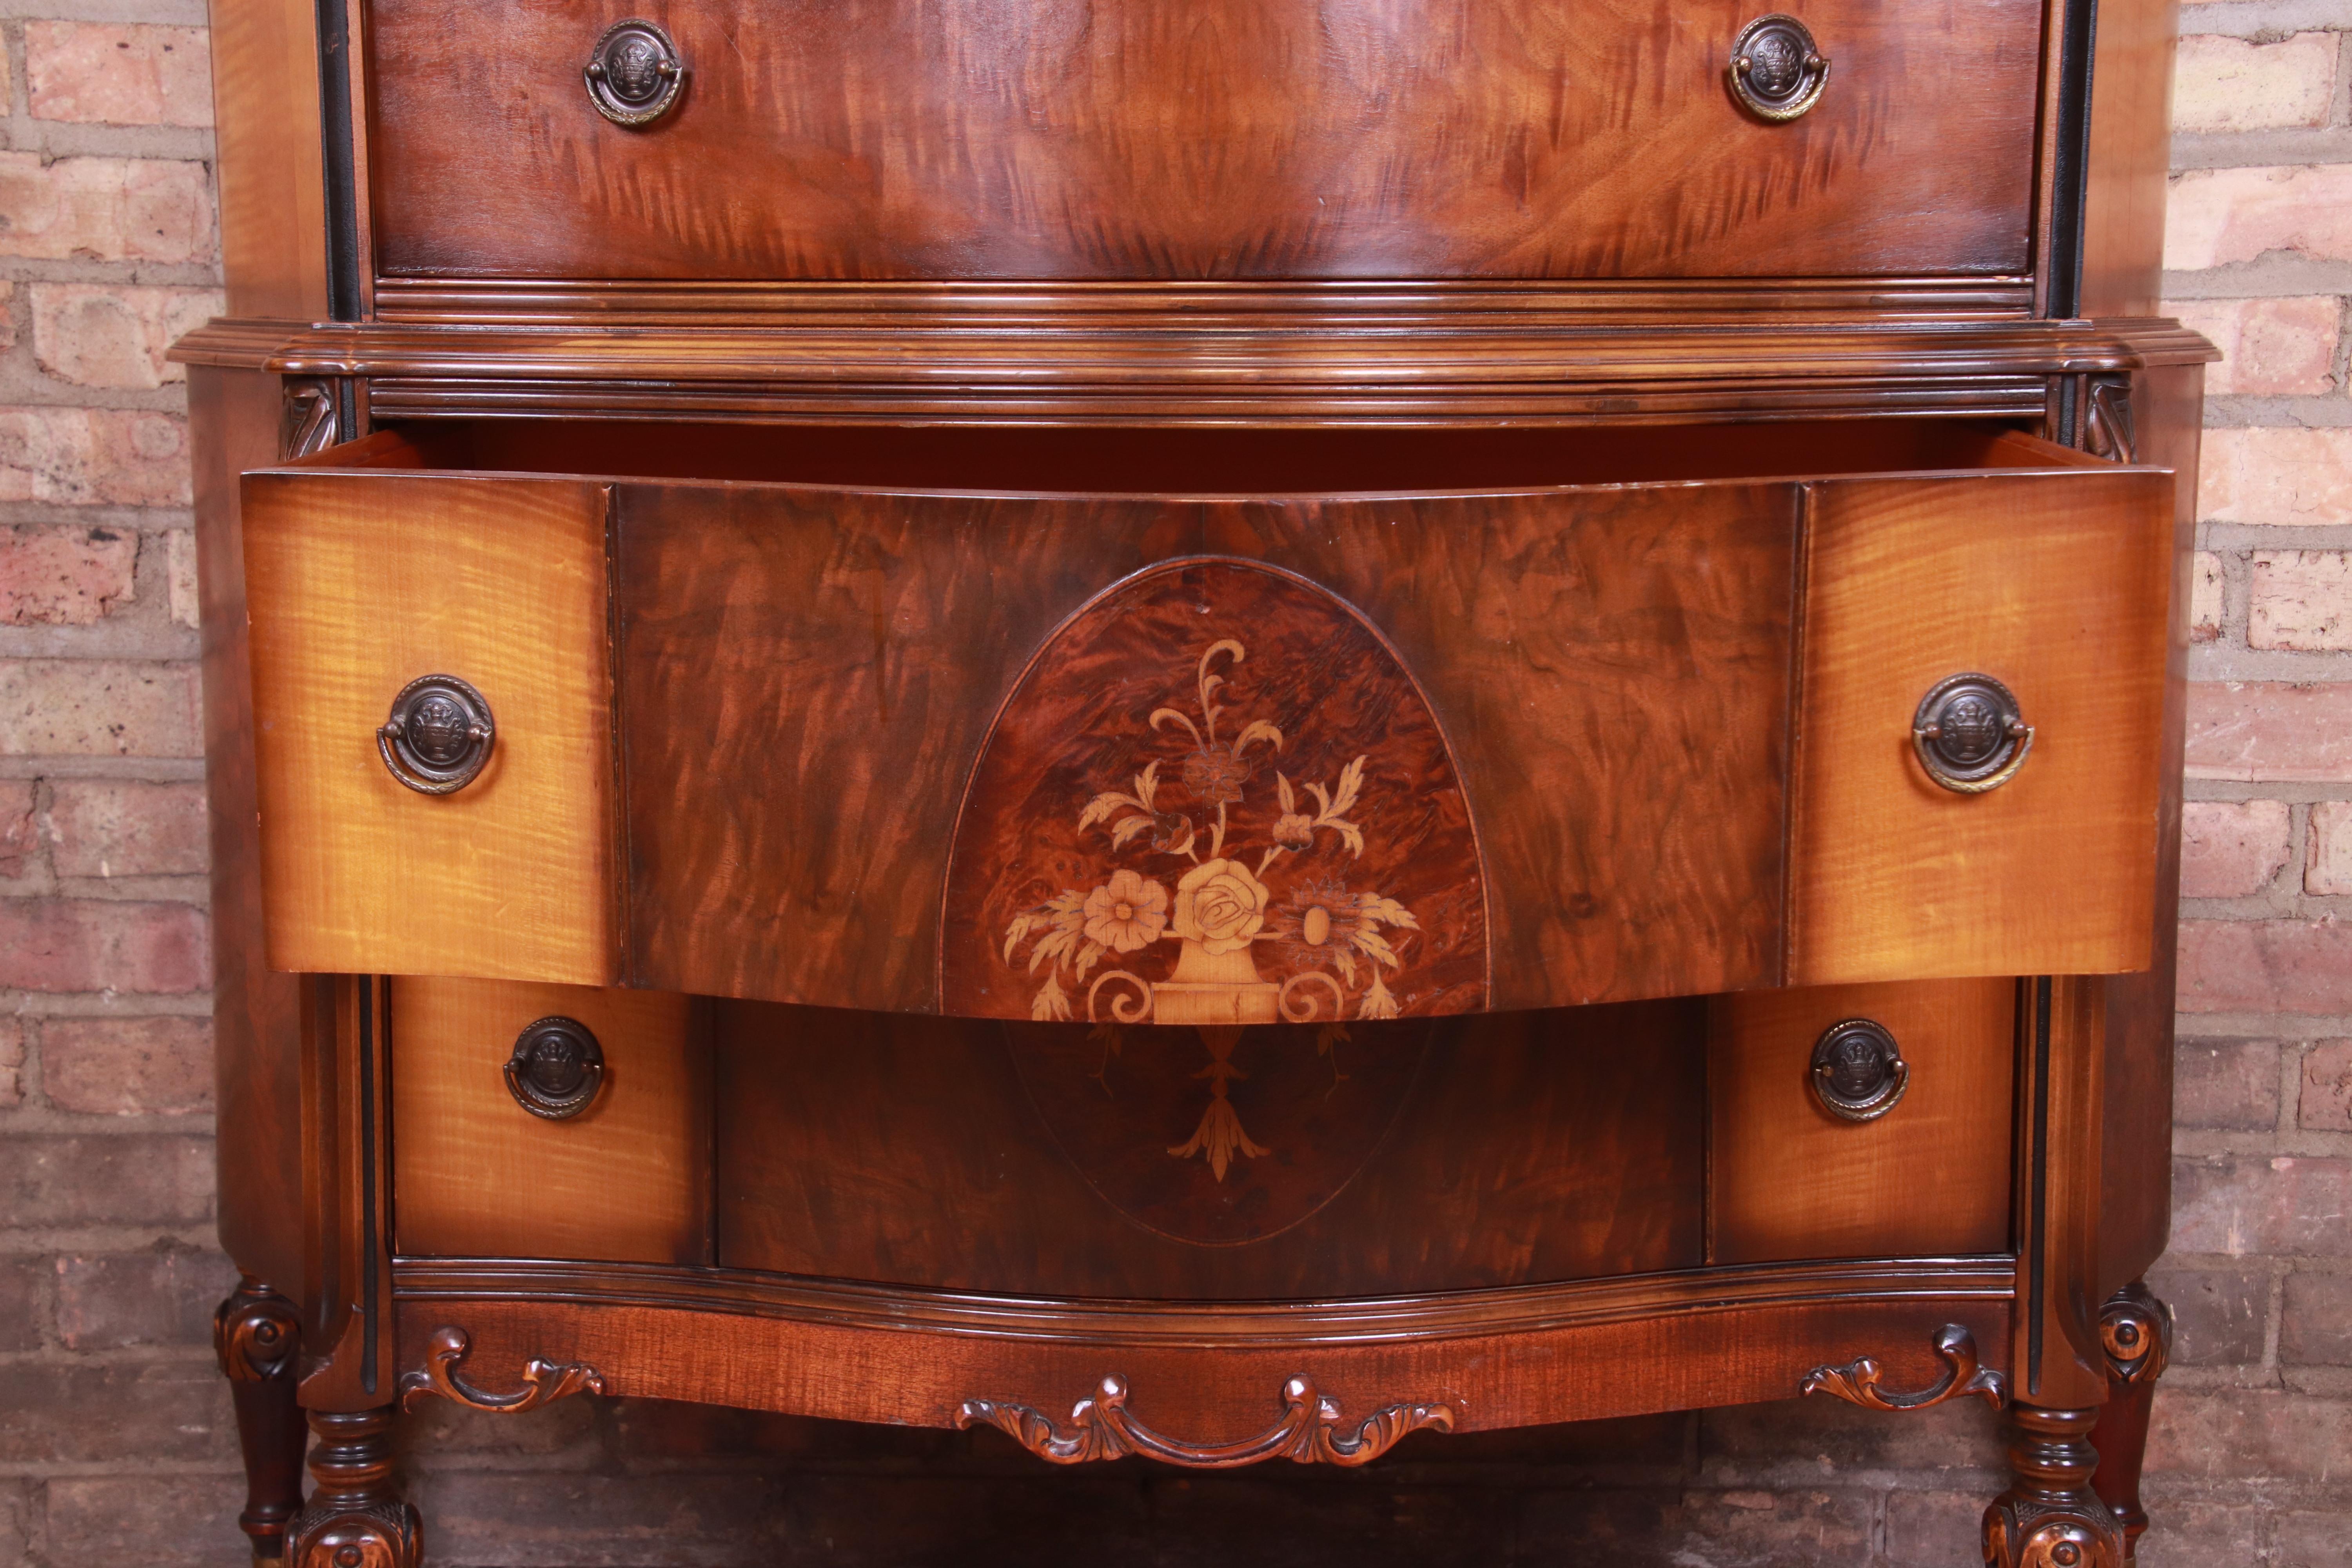 Early 20th Century Antique Art Deco Burled Walnut and Inlaid Marquetry Highboy Dresser, Circa 1920s